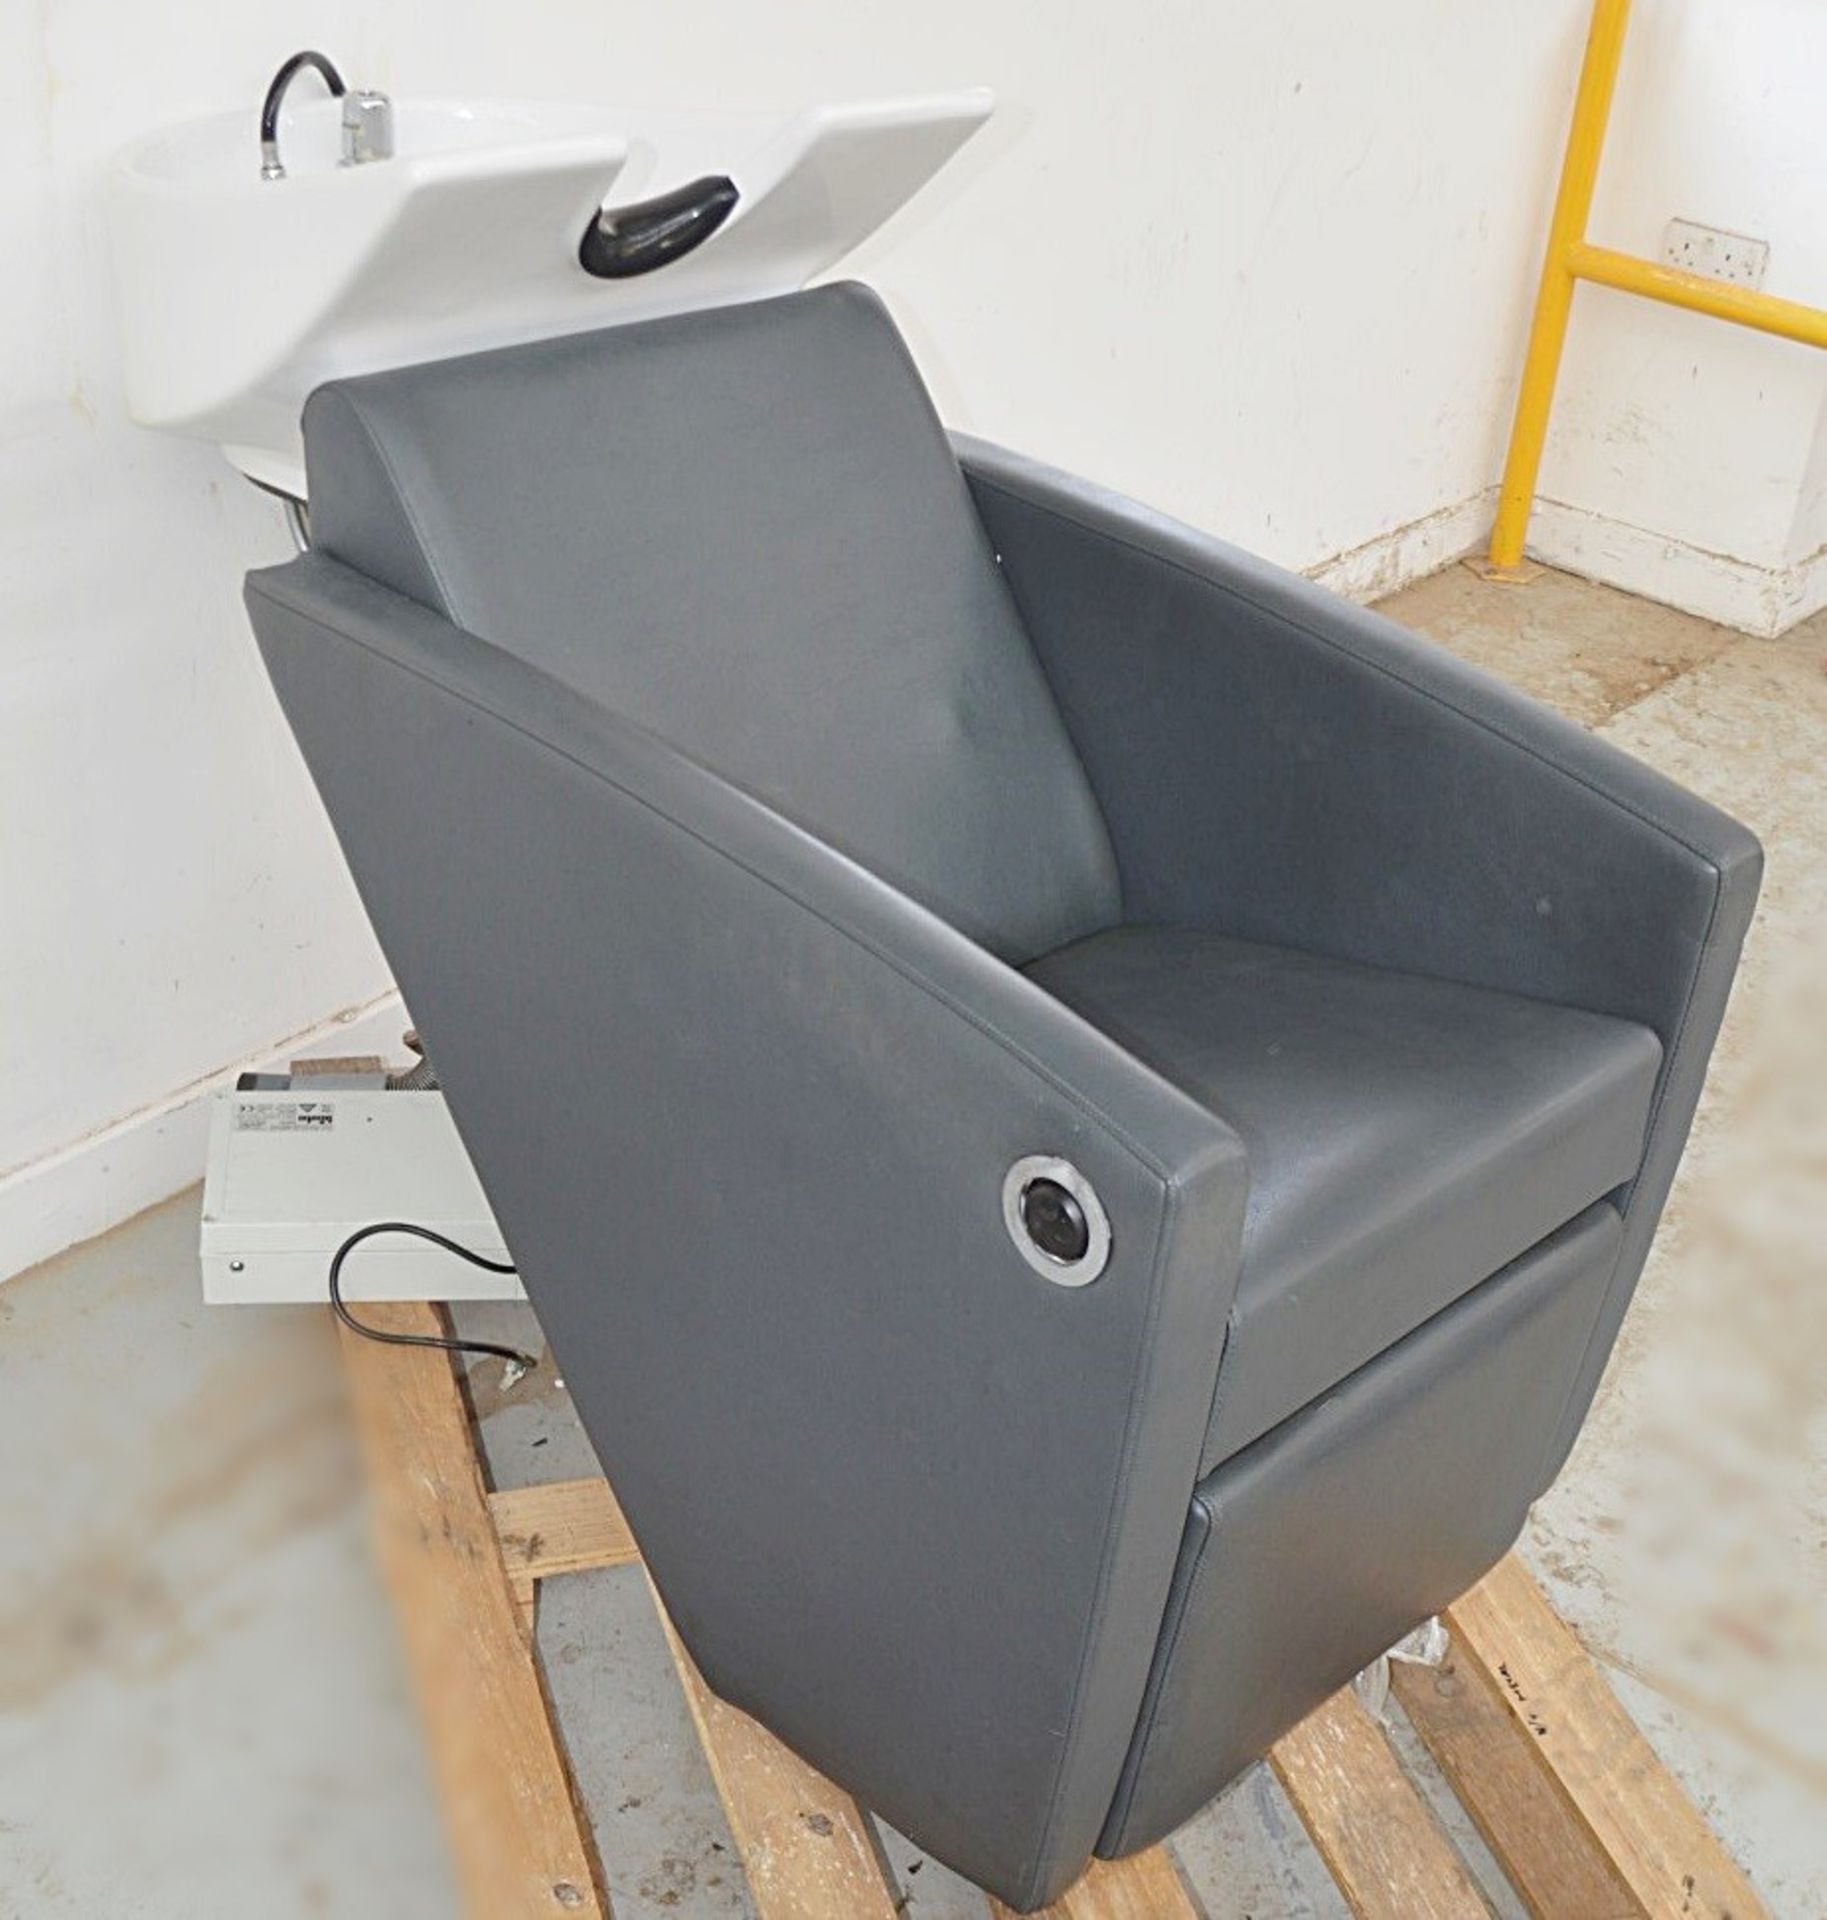 1 x Professional Reclining Hair Washing Chair With Basin Shower And Foot Rest - Image 4 of 19